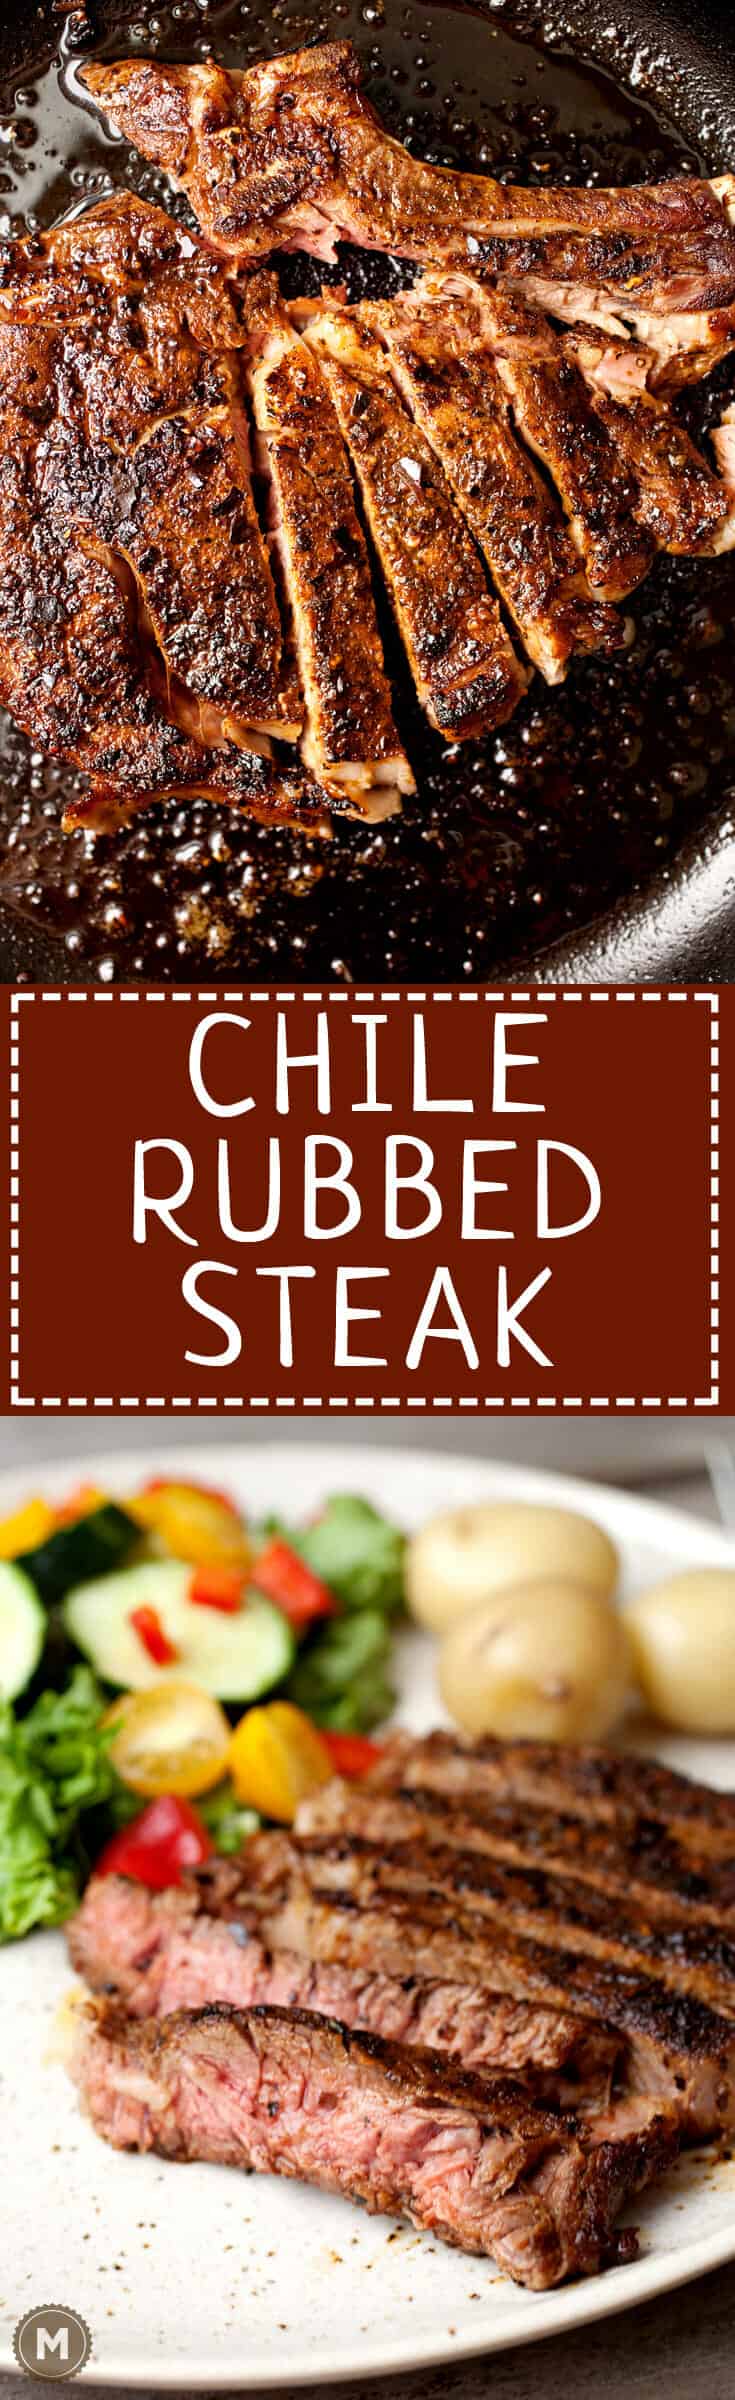 Chile Rubbed Steak: Roasted chiles mashed into a coarse chile powder is the perfect topping for a good steak! Here's how to do it! | macheesmo.com